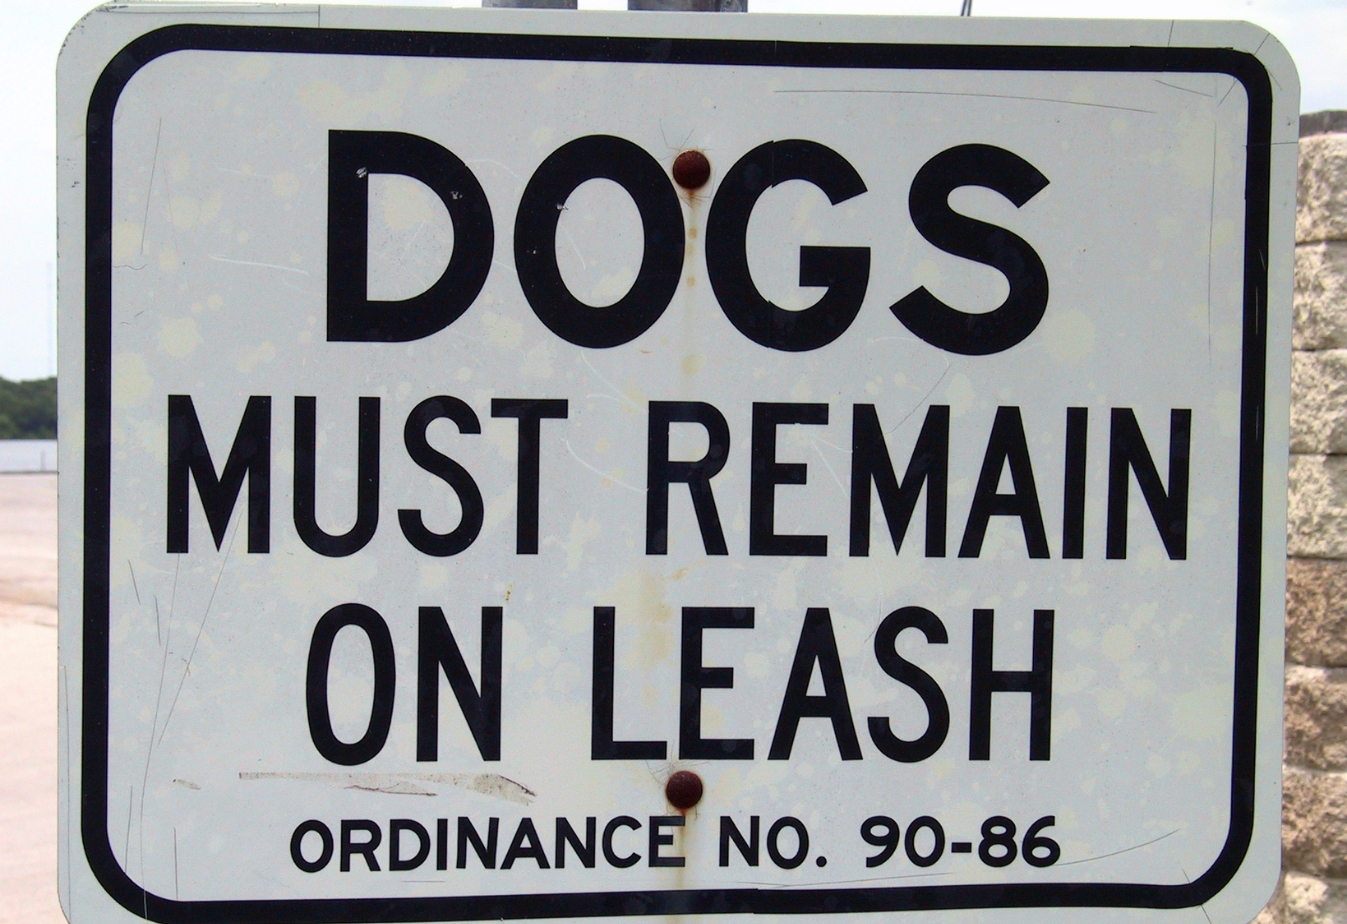 white street sign and in black text it reads "dogs must remain on leash ordinance No.90-86"